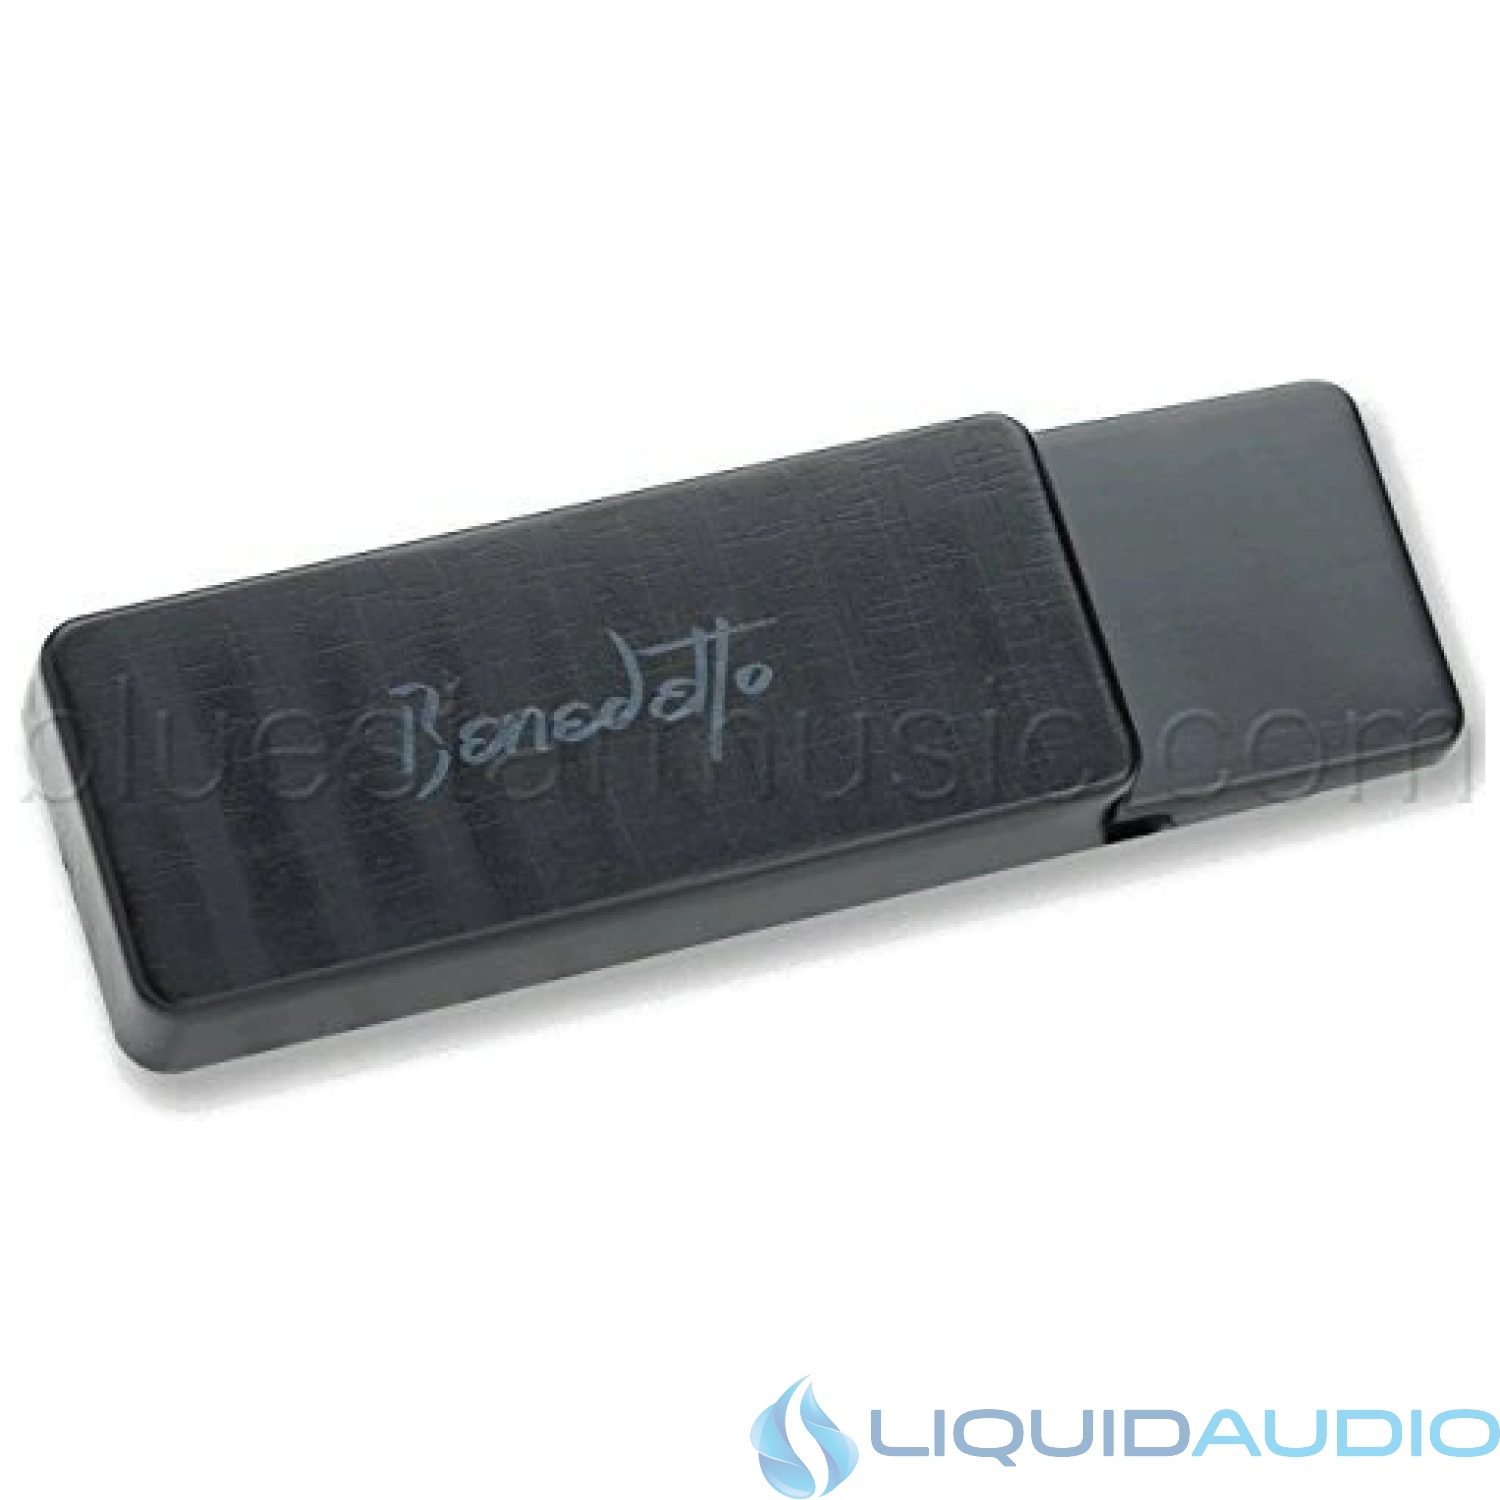 Seymour Duncan 11601-01 Benedetto Pickups - Benedetto S-6 S-Series Floating Jazz Guitar Pickup